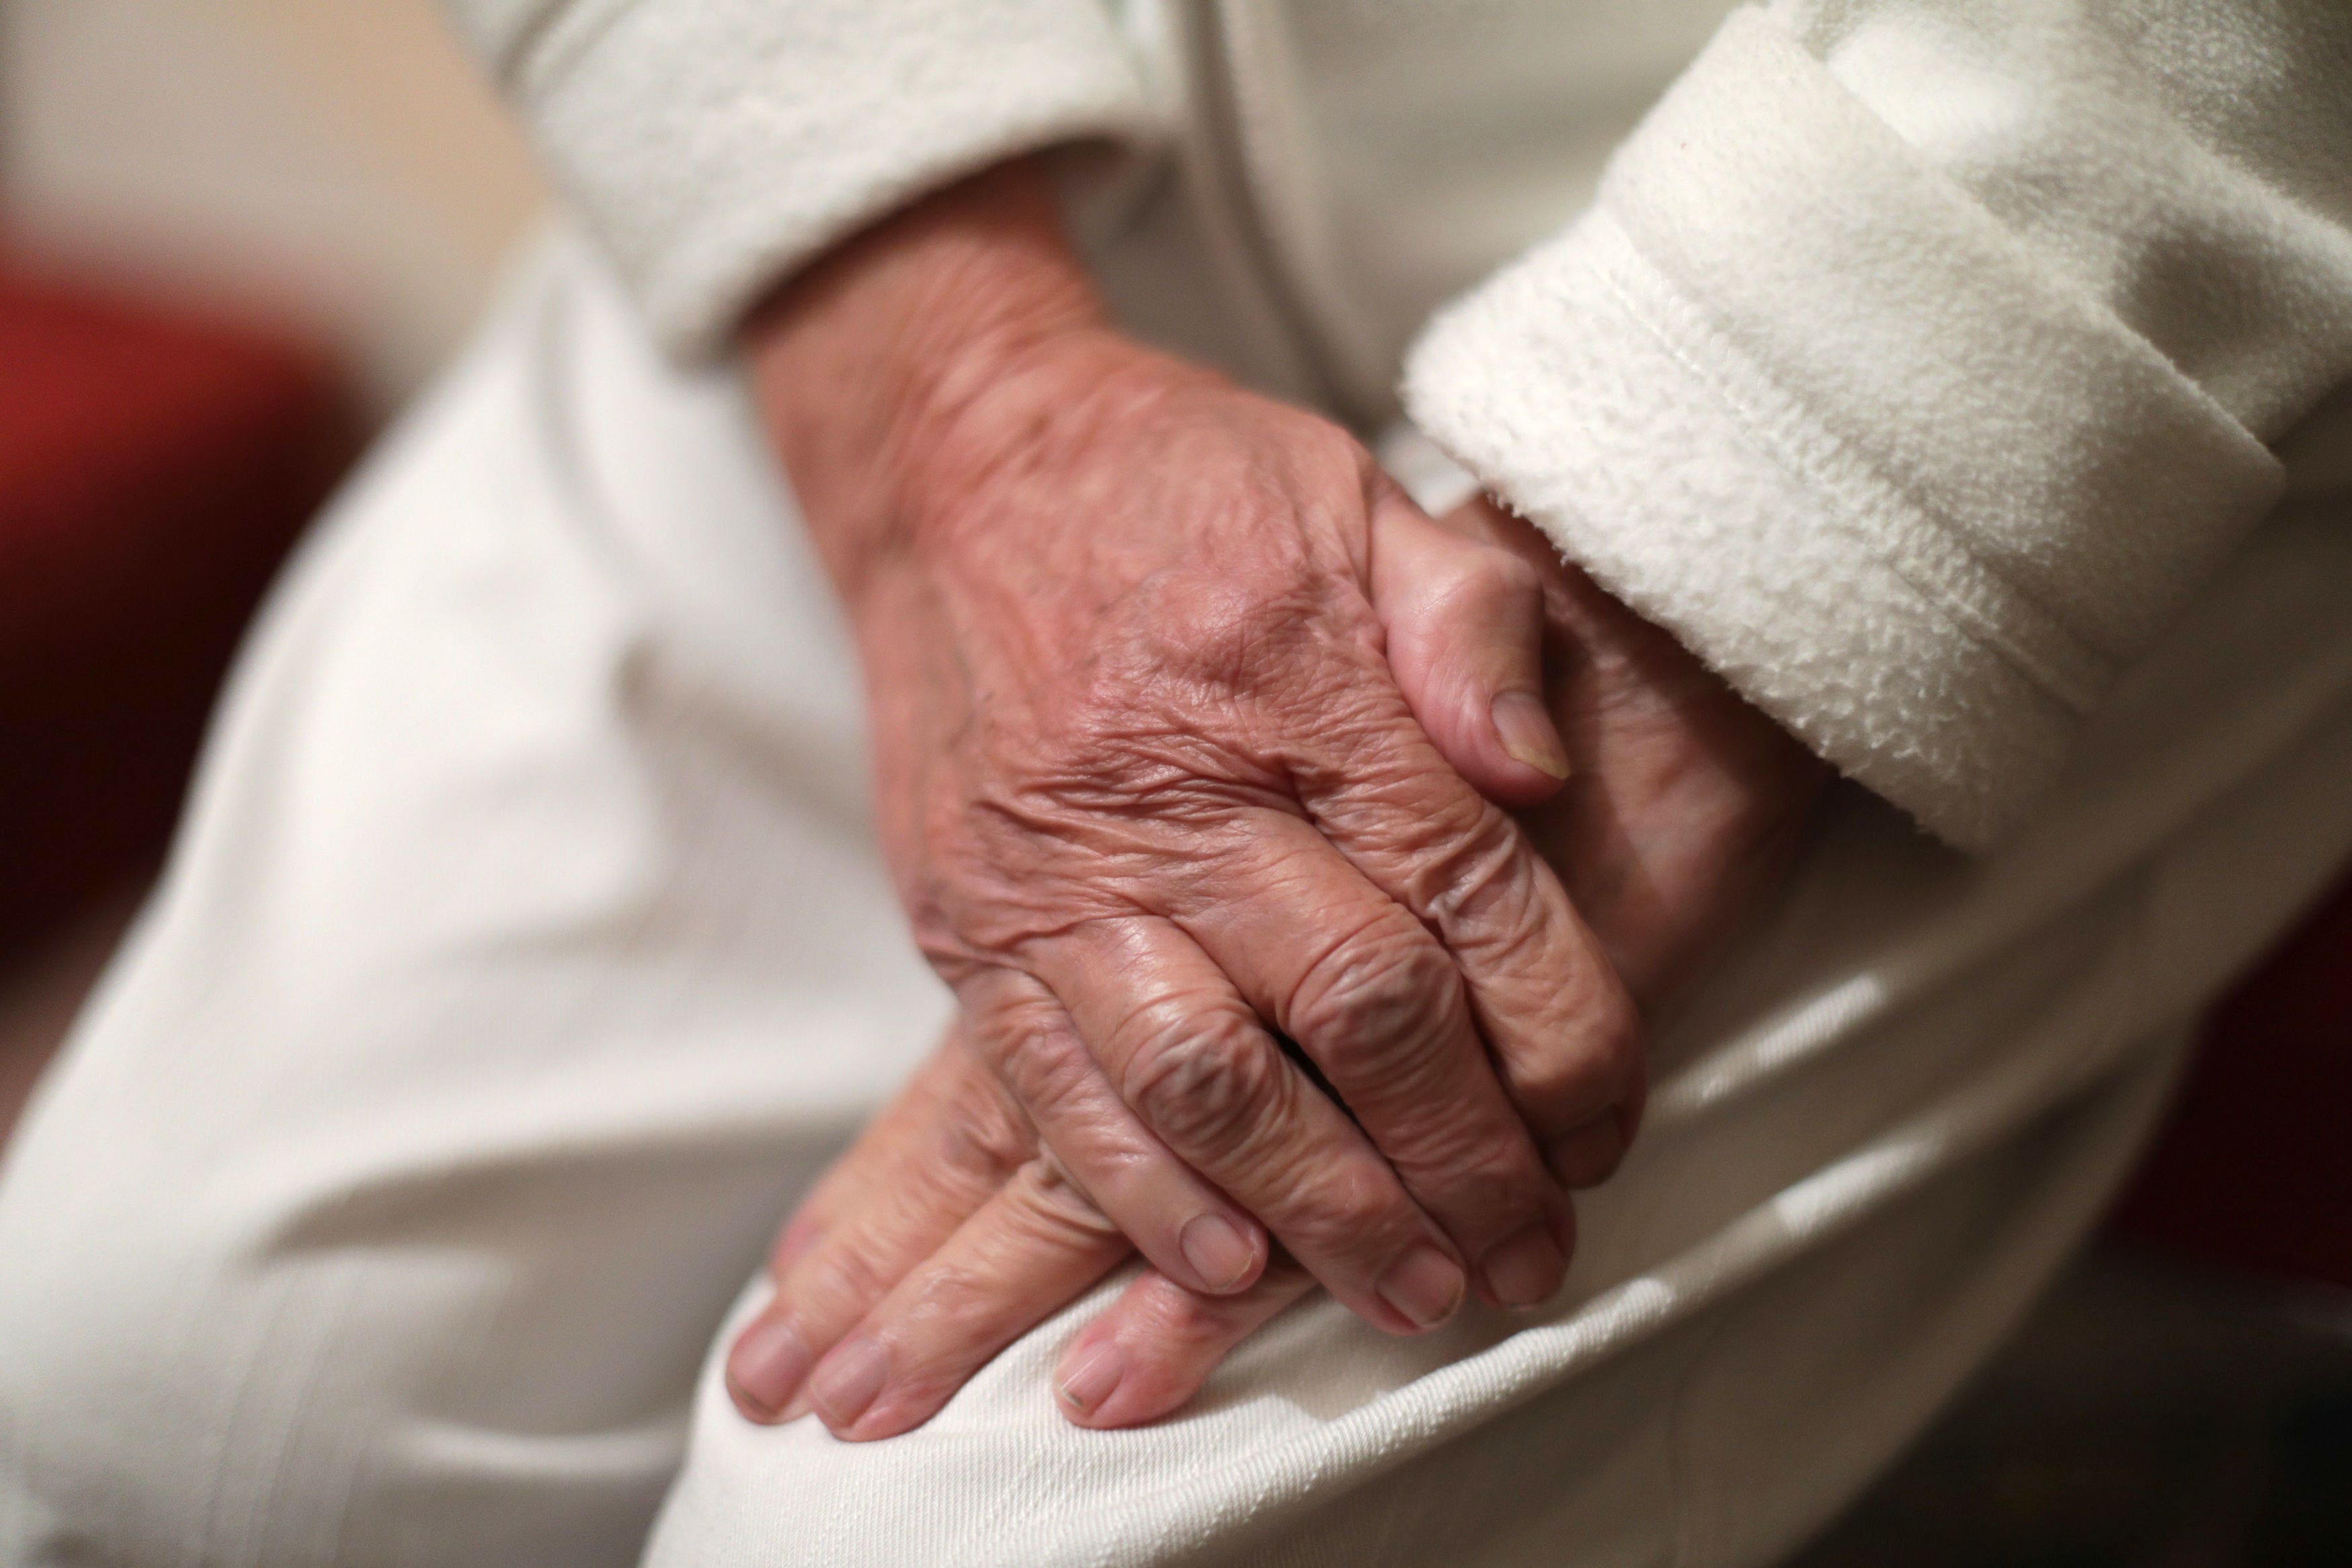 High biological age may increase the risk of dementia and stroke, study suggests (Yui Mok/PA)